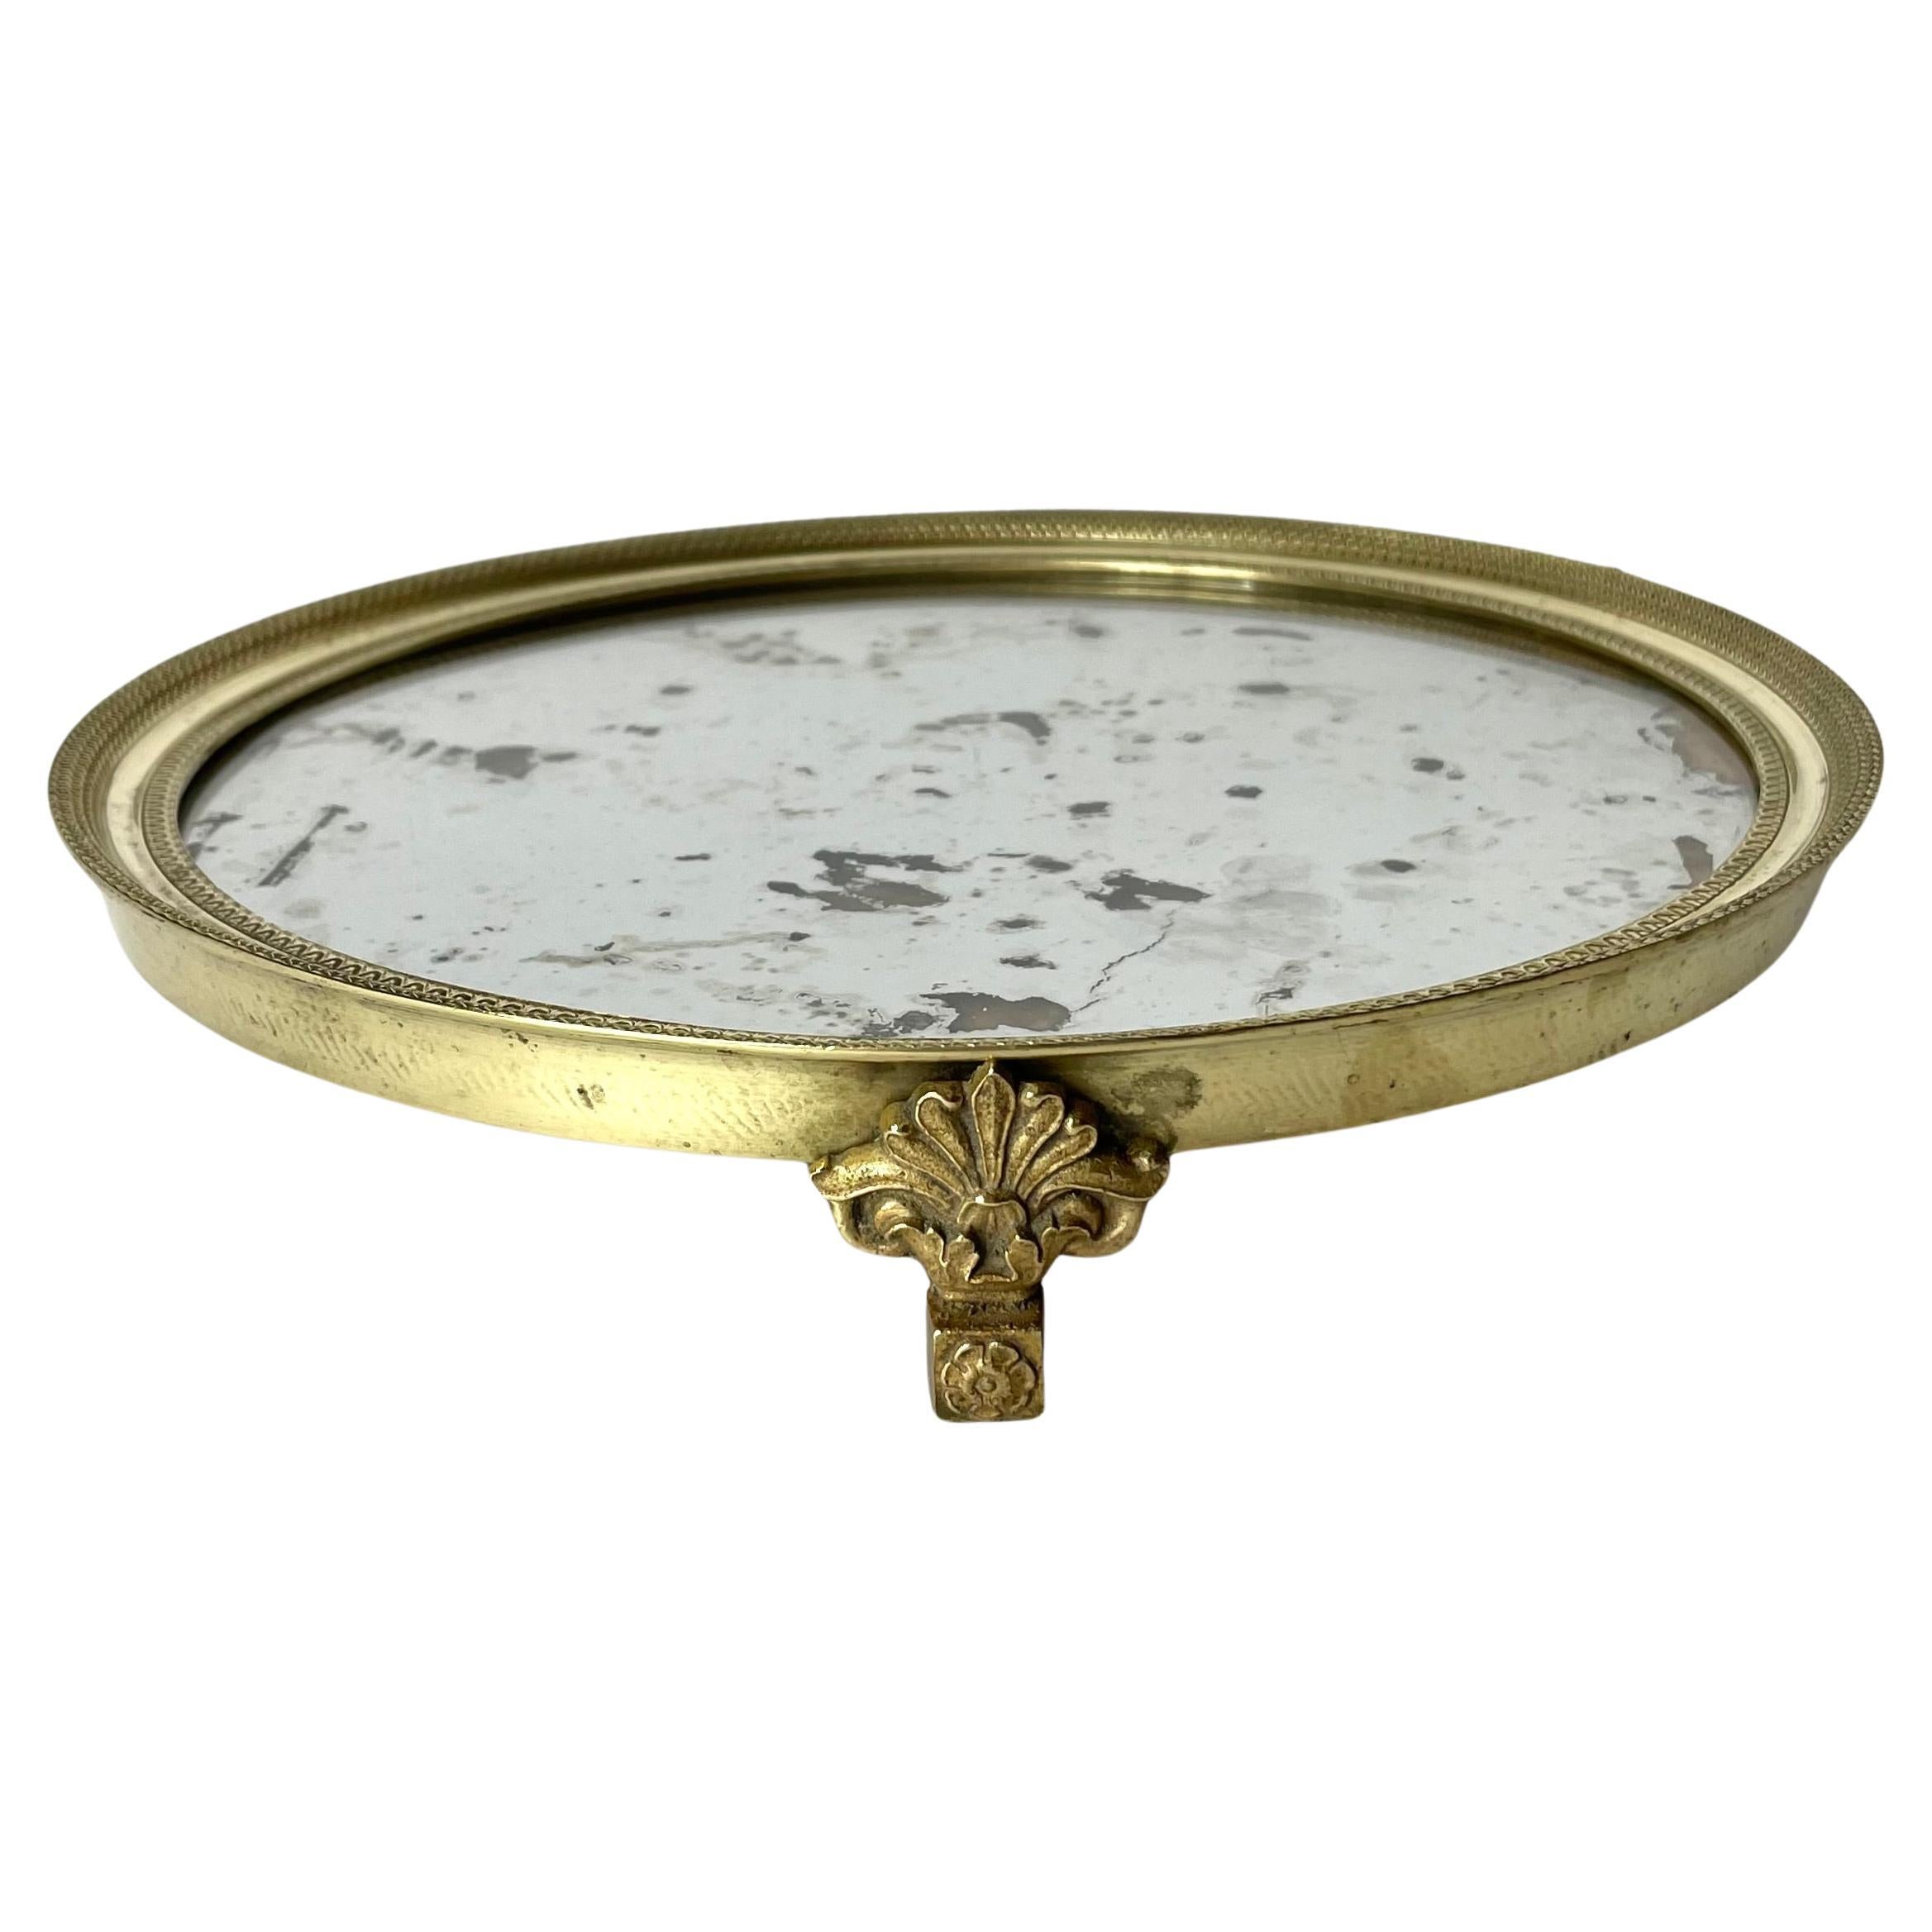 The Elegance French Empire Table Plateau in Bronze with nice patina from 1810s (en anglais seulement) en vente